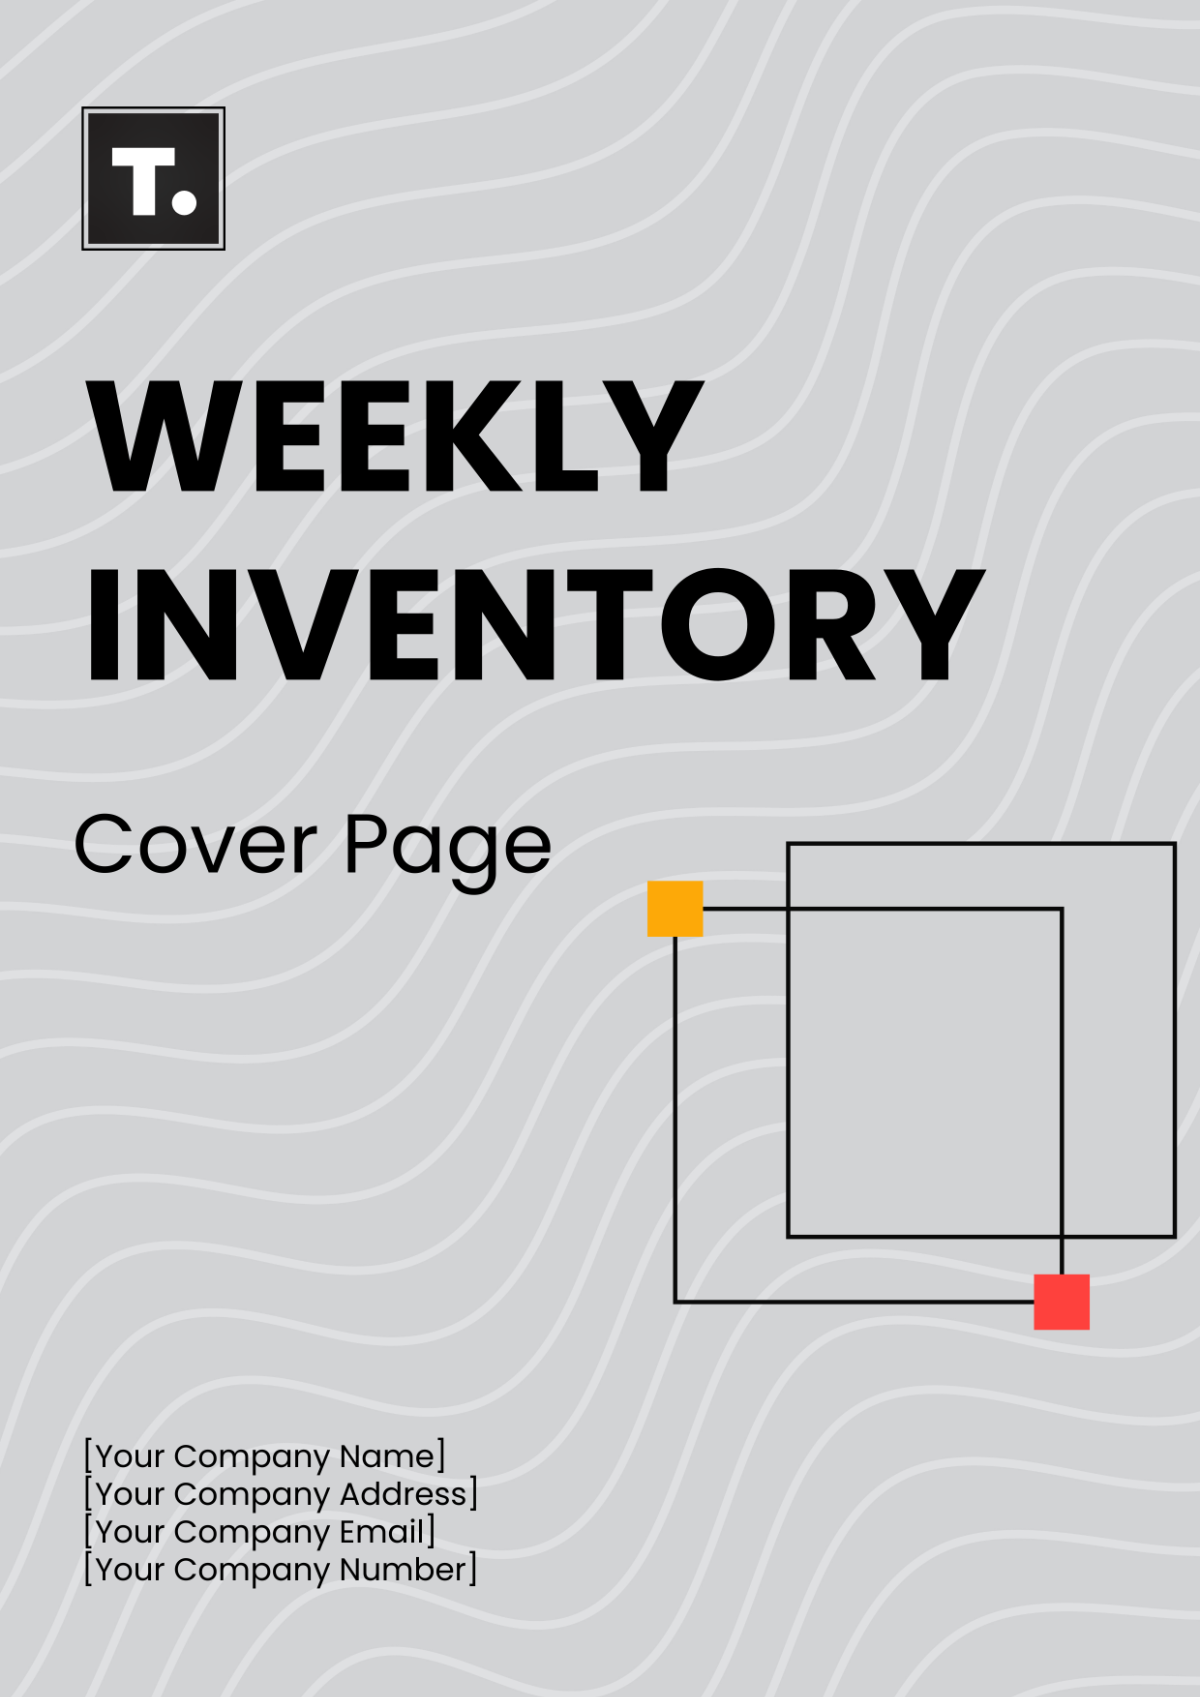 Weekly Inventory Cover Page